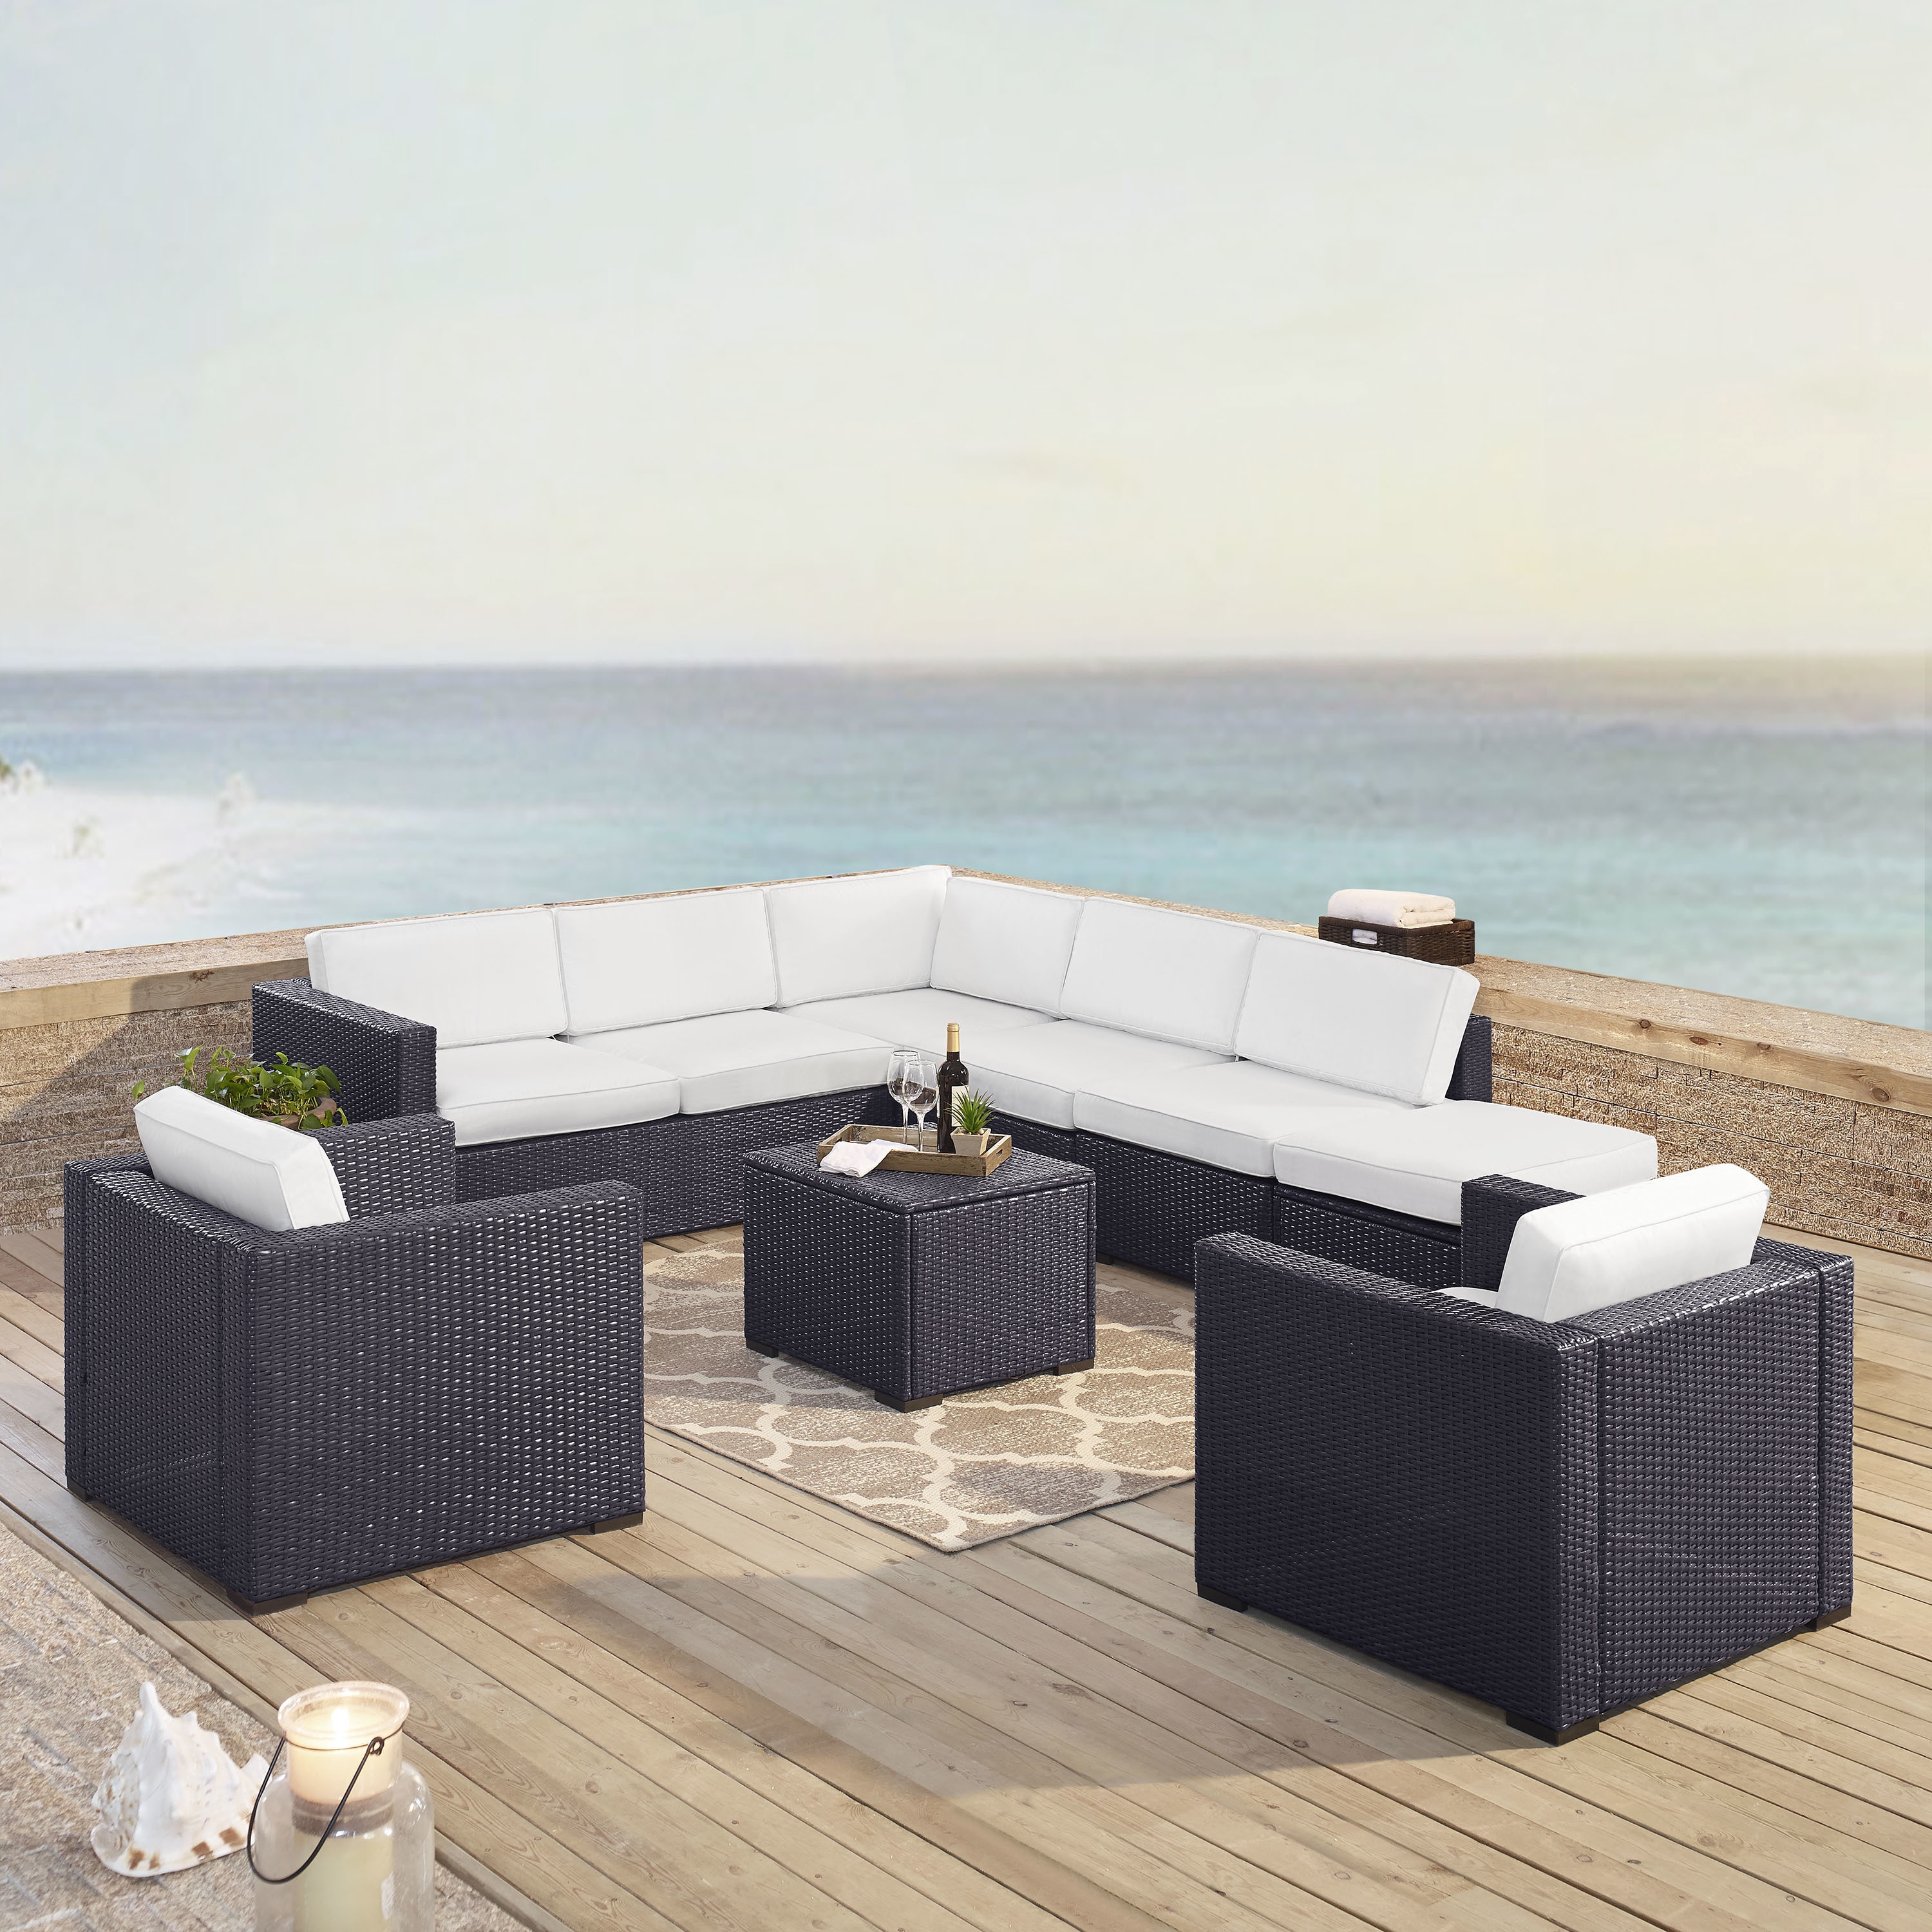 Biscayne Brown 7-piece Outdoor Wicker Seating Set With White Cushions